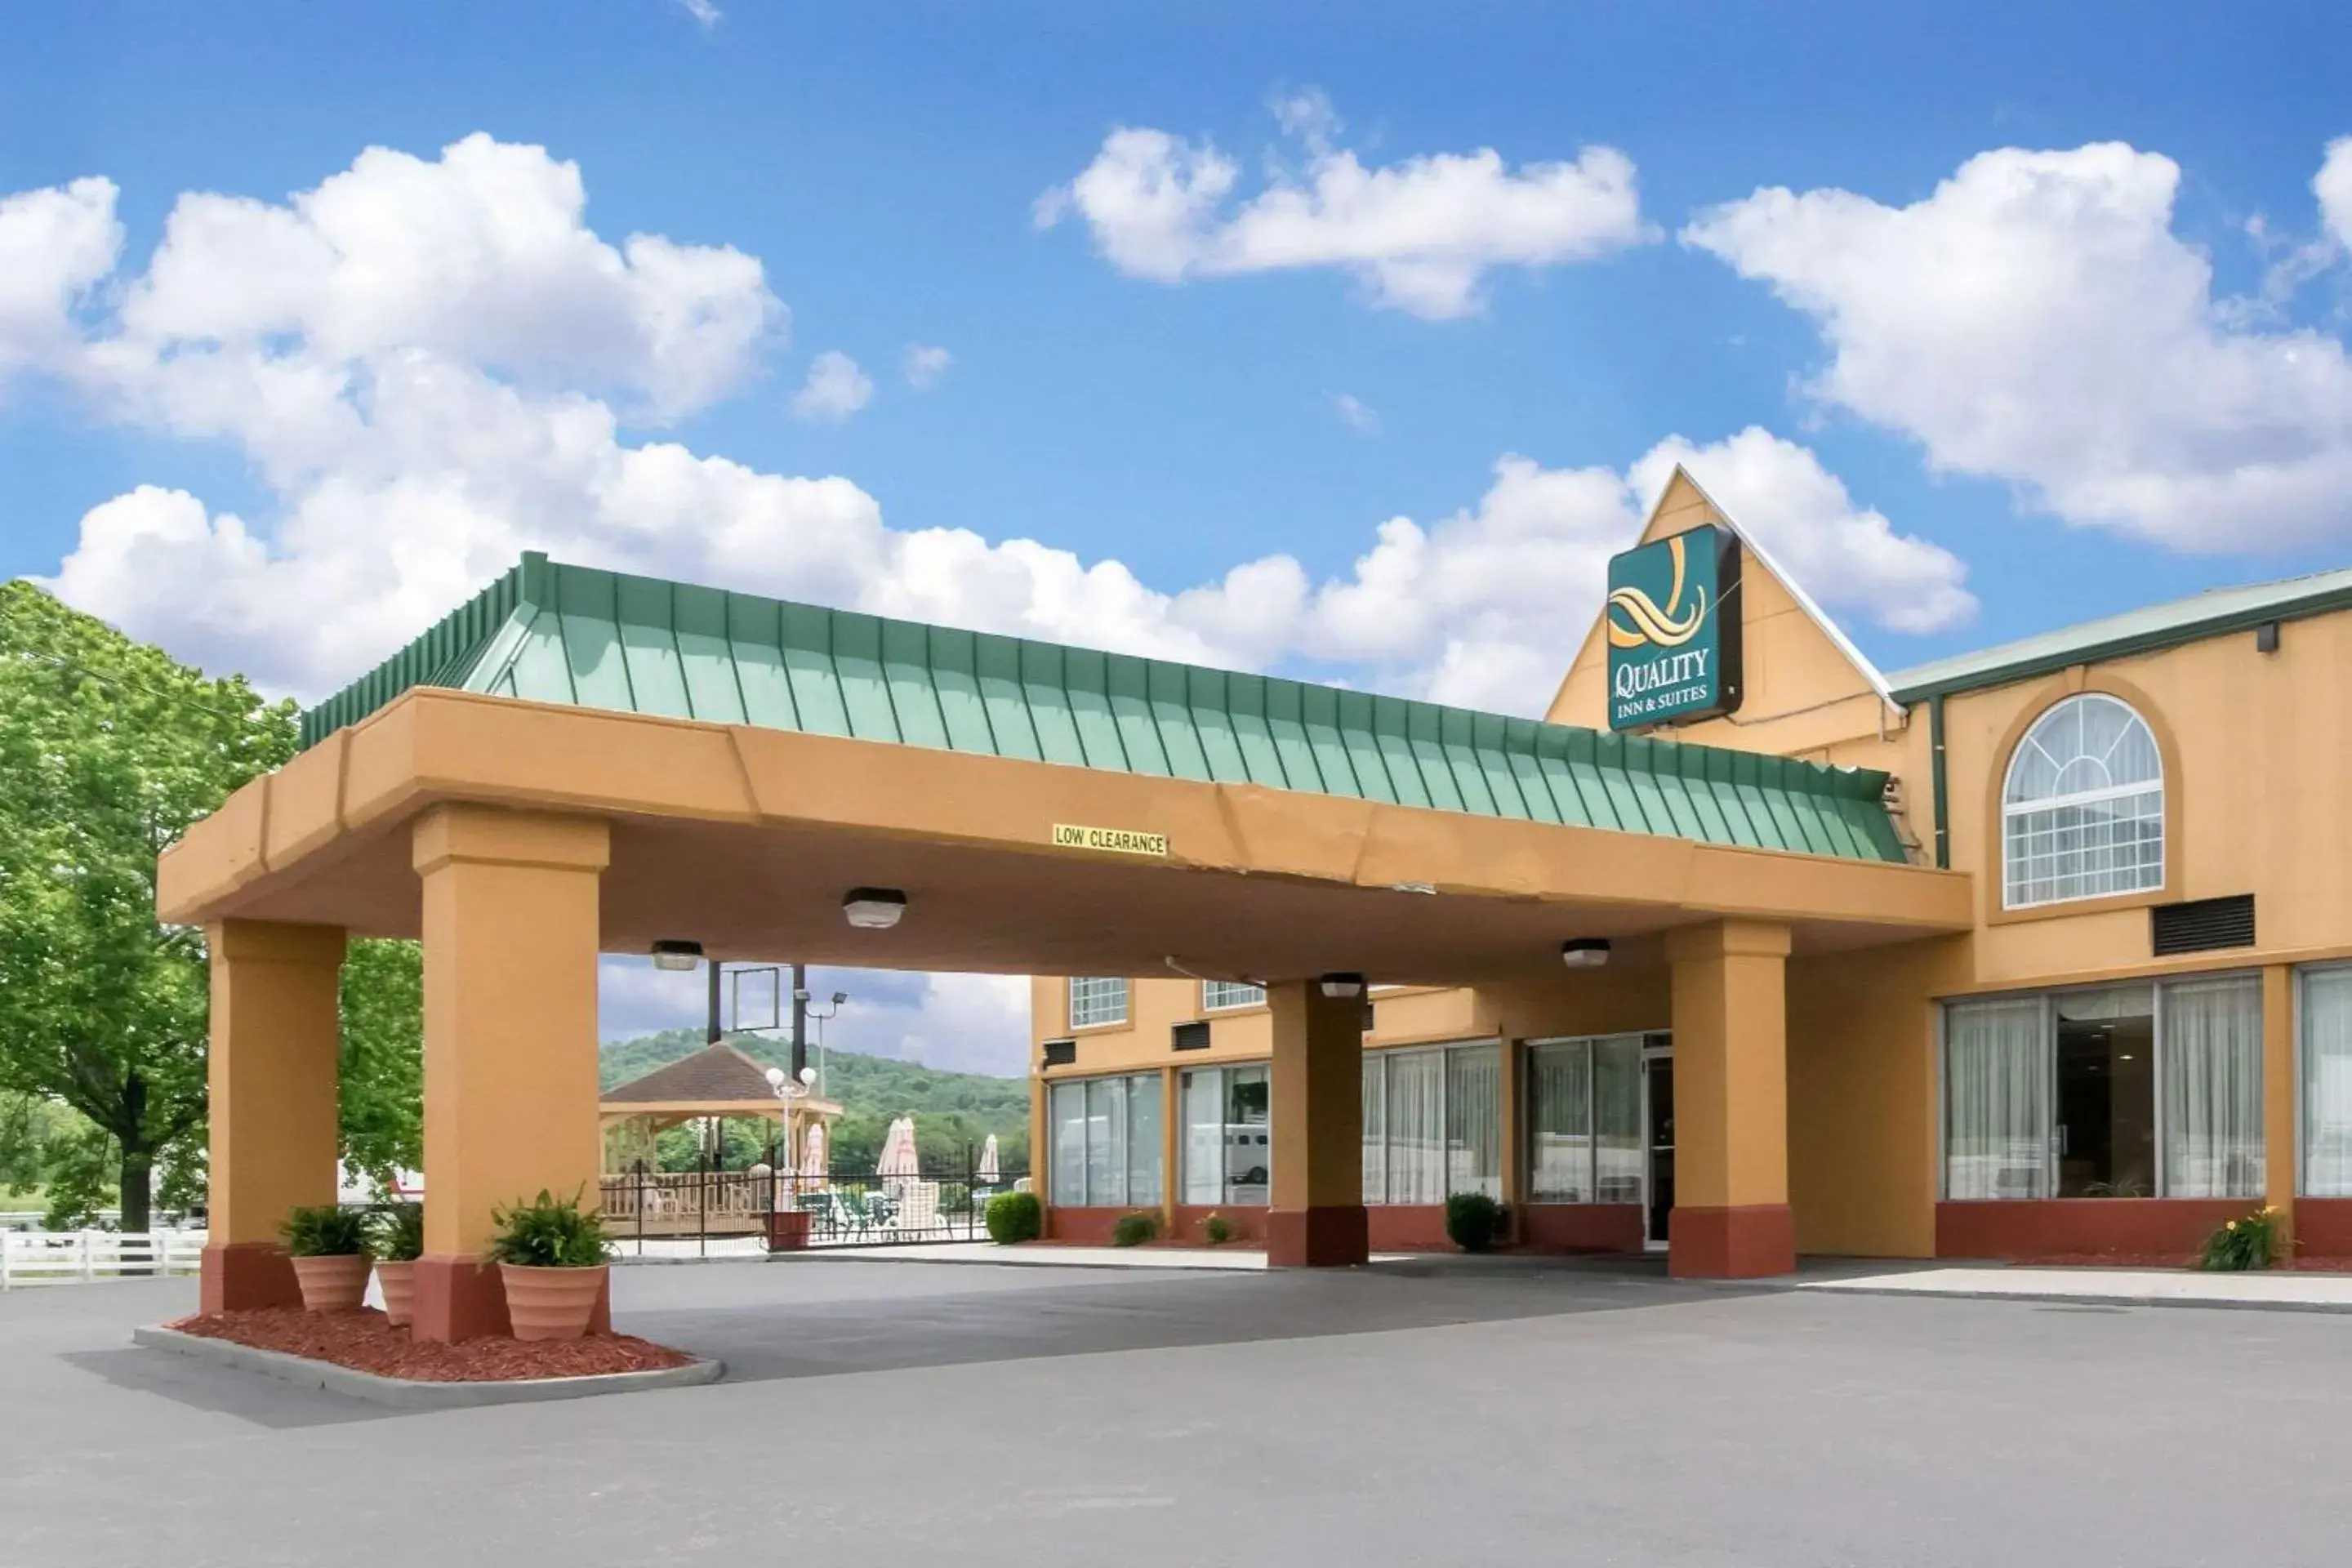 Property building in Quality Inn & Suites - Horse Cave